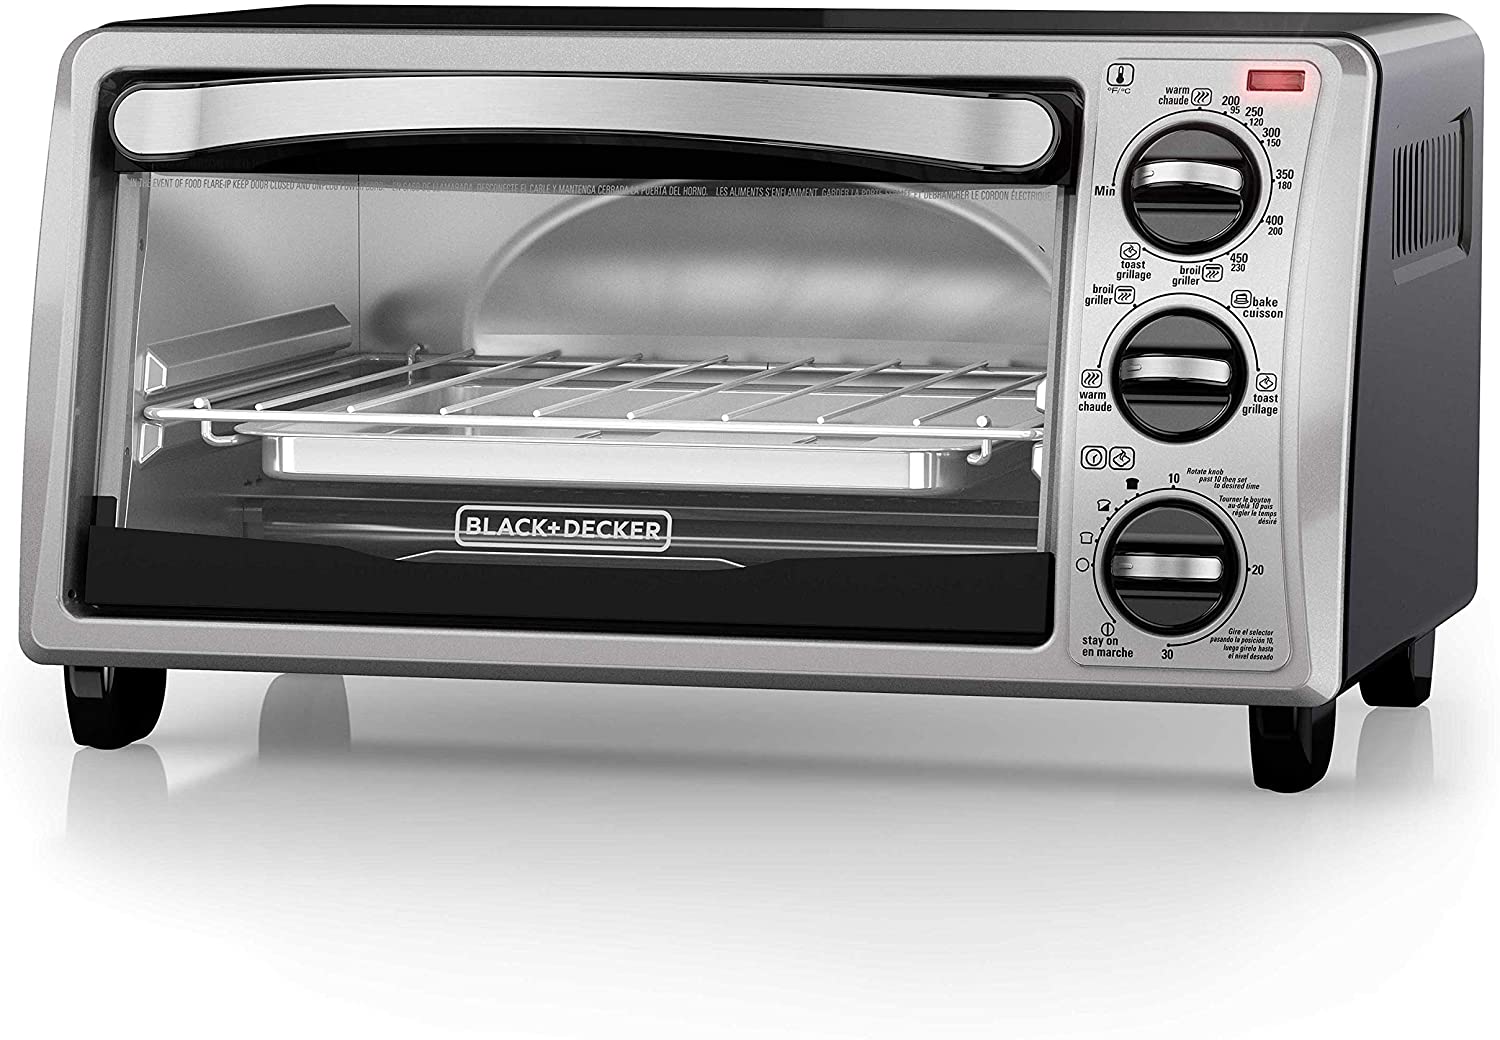 https://www.dontwasteyourmoney.com/wp-content/uploads/2020/06/blackdecker-to1313sbd-toaster-oven-toaster-oven.jpg